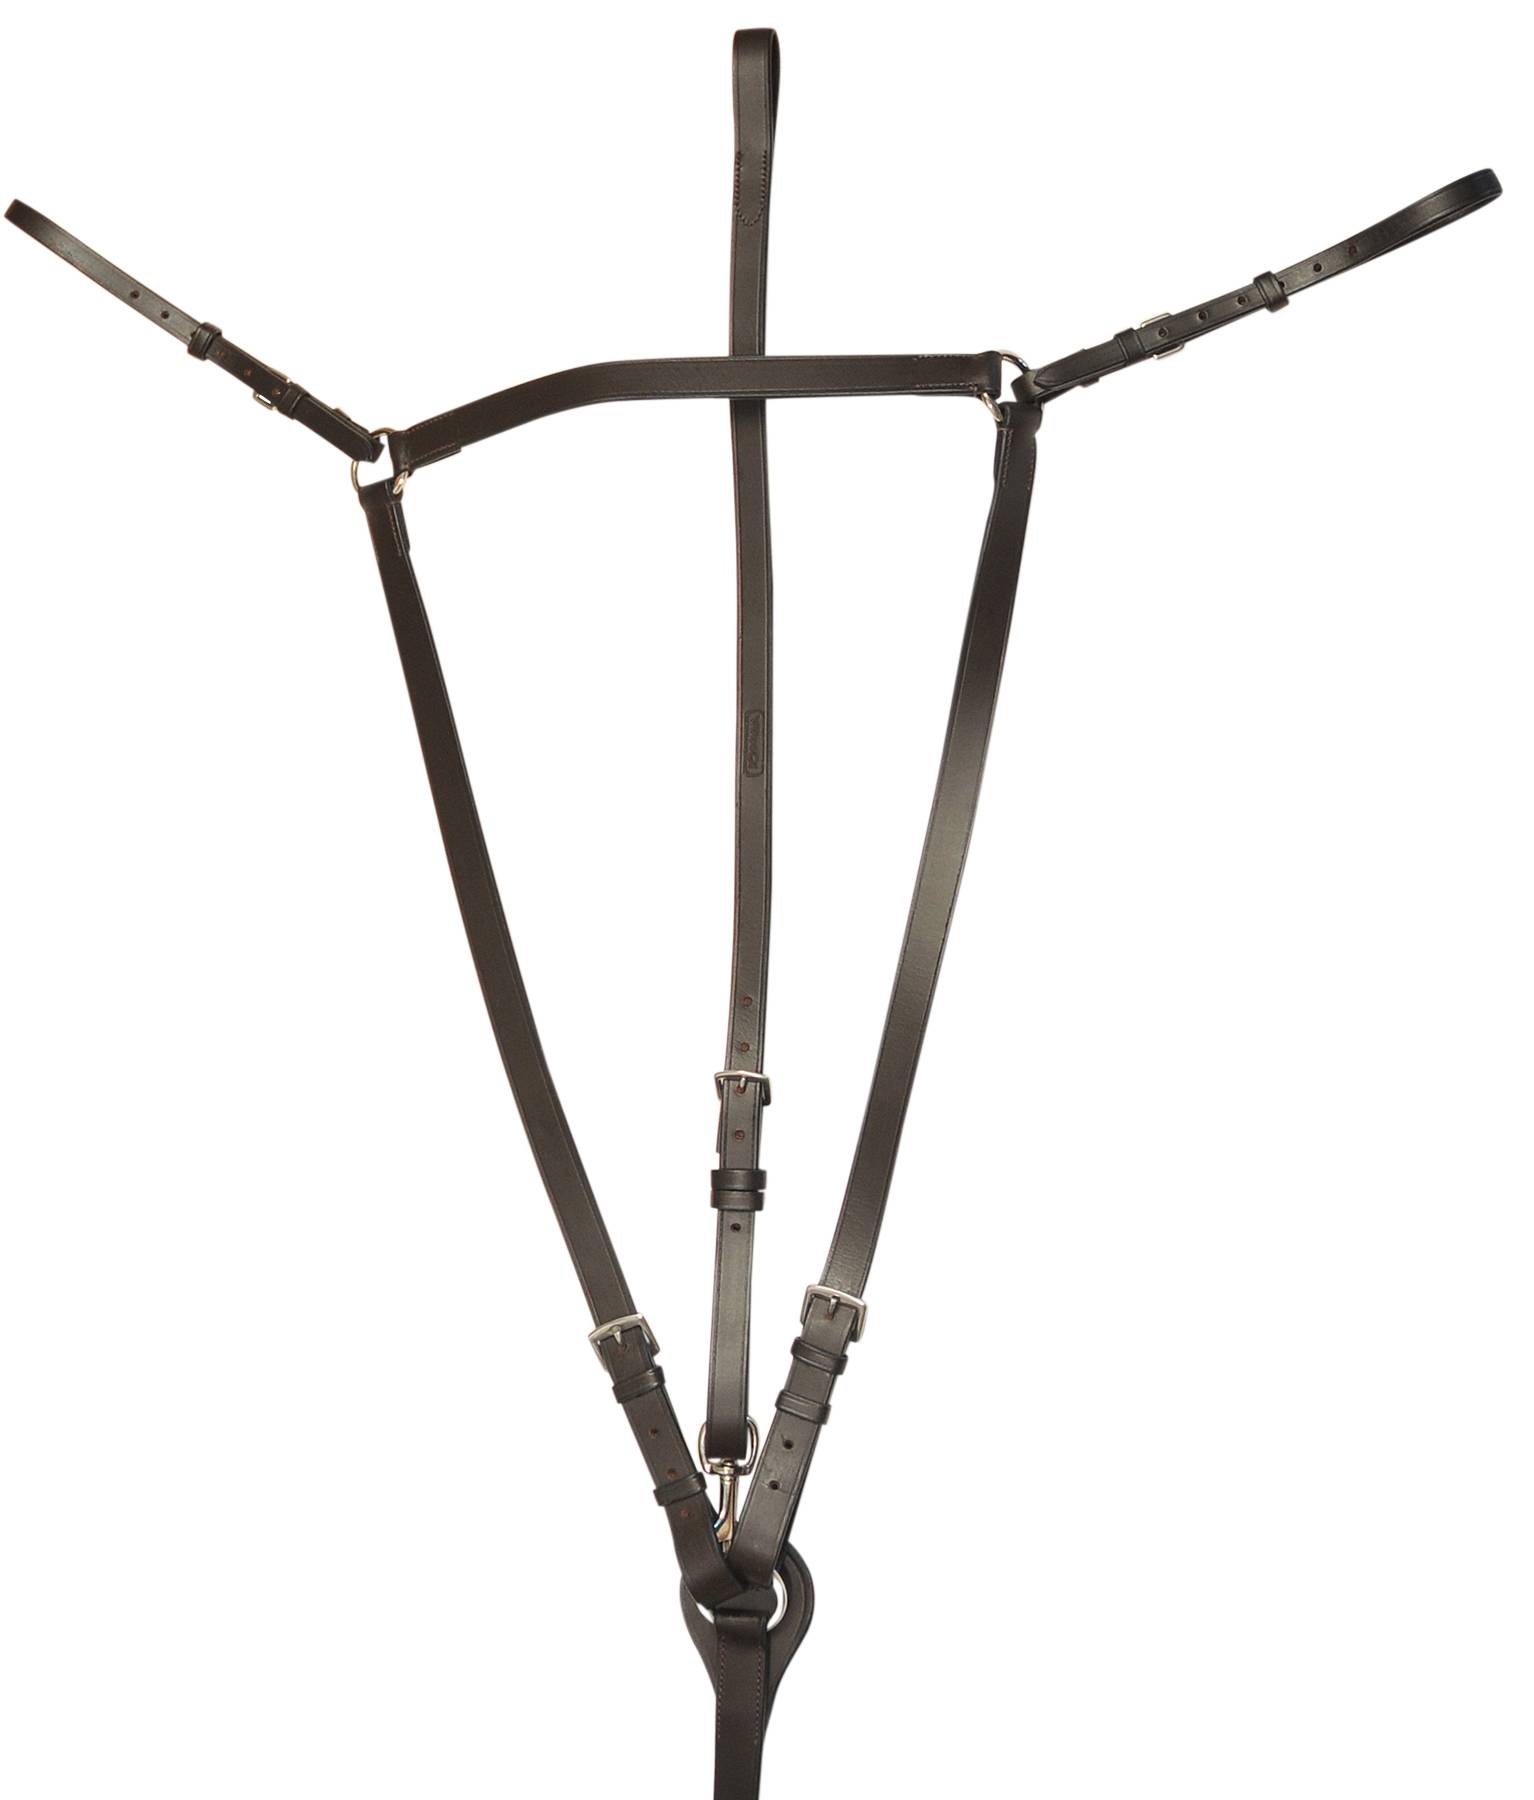 Treadstone Windeck Flat Breastplate with Standing Attachment